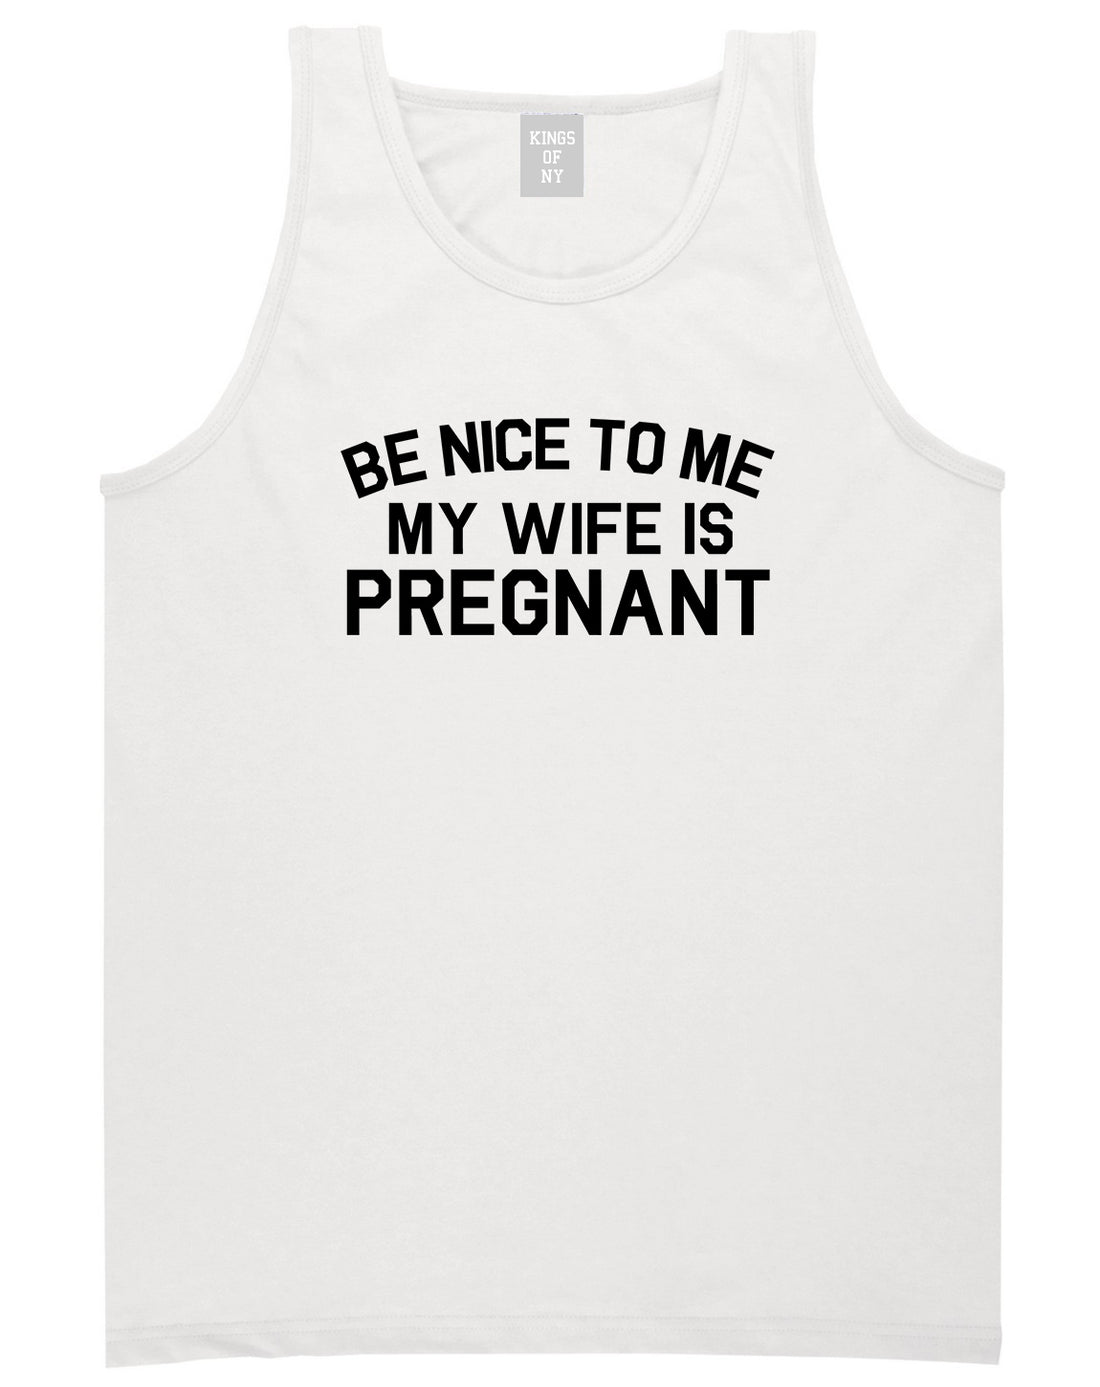 Be Nice To Me My Wife Is Pregnant Mens Tank Top Shirt White